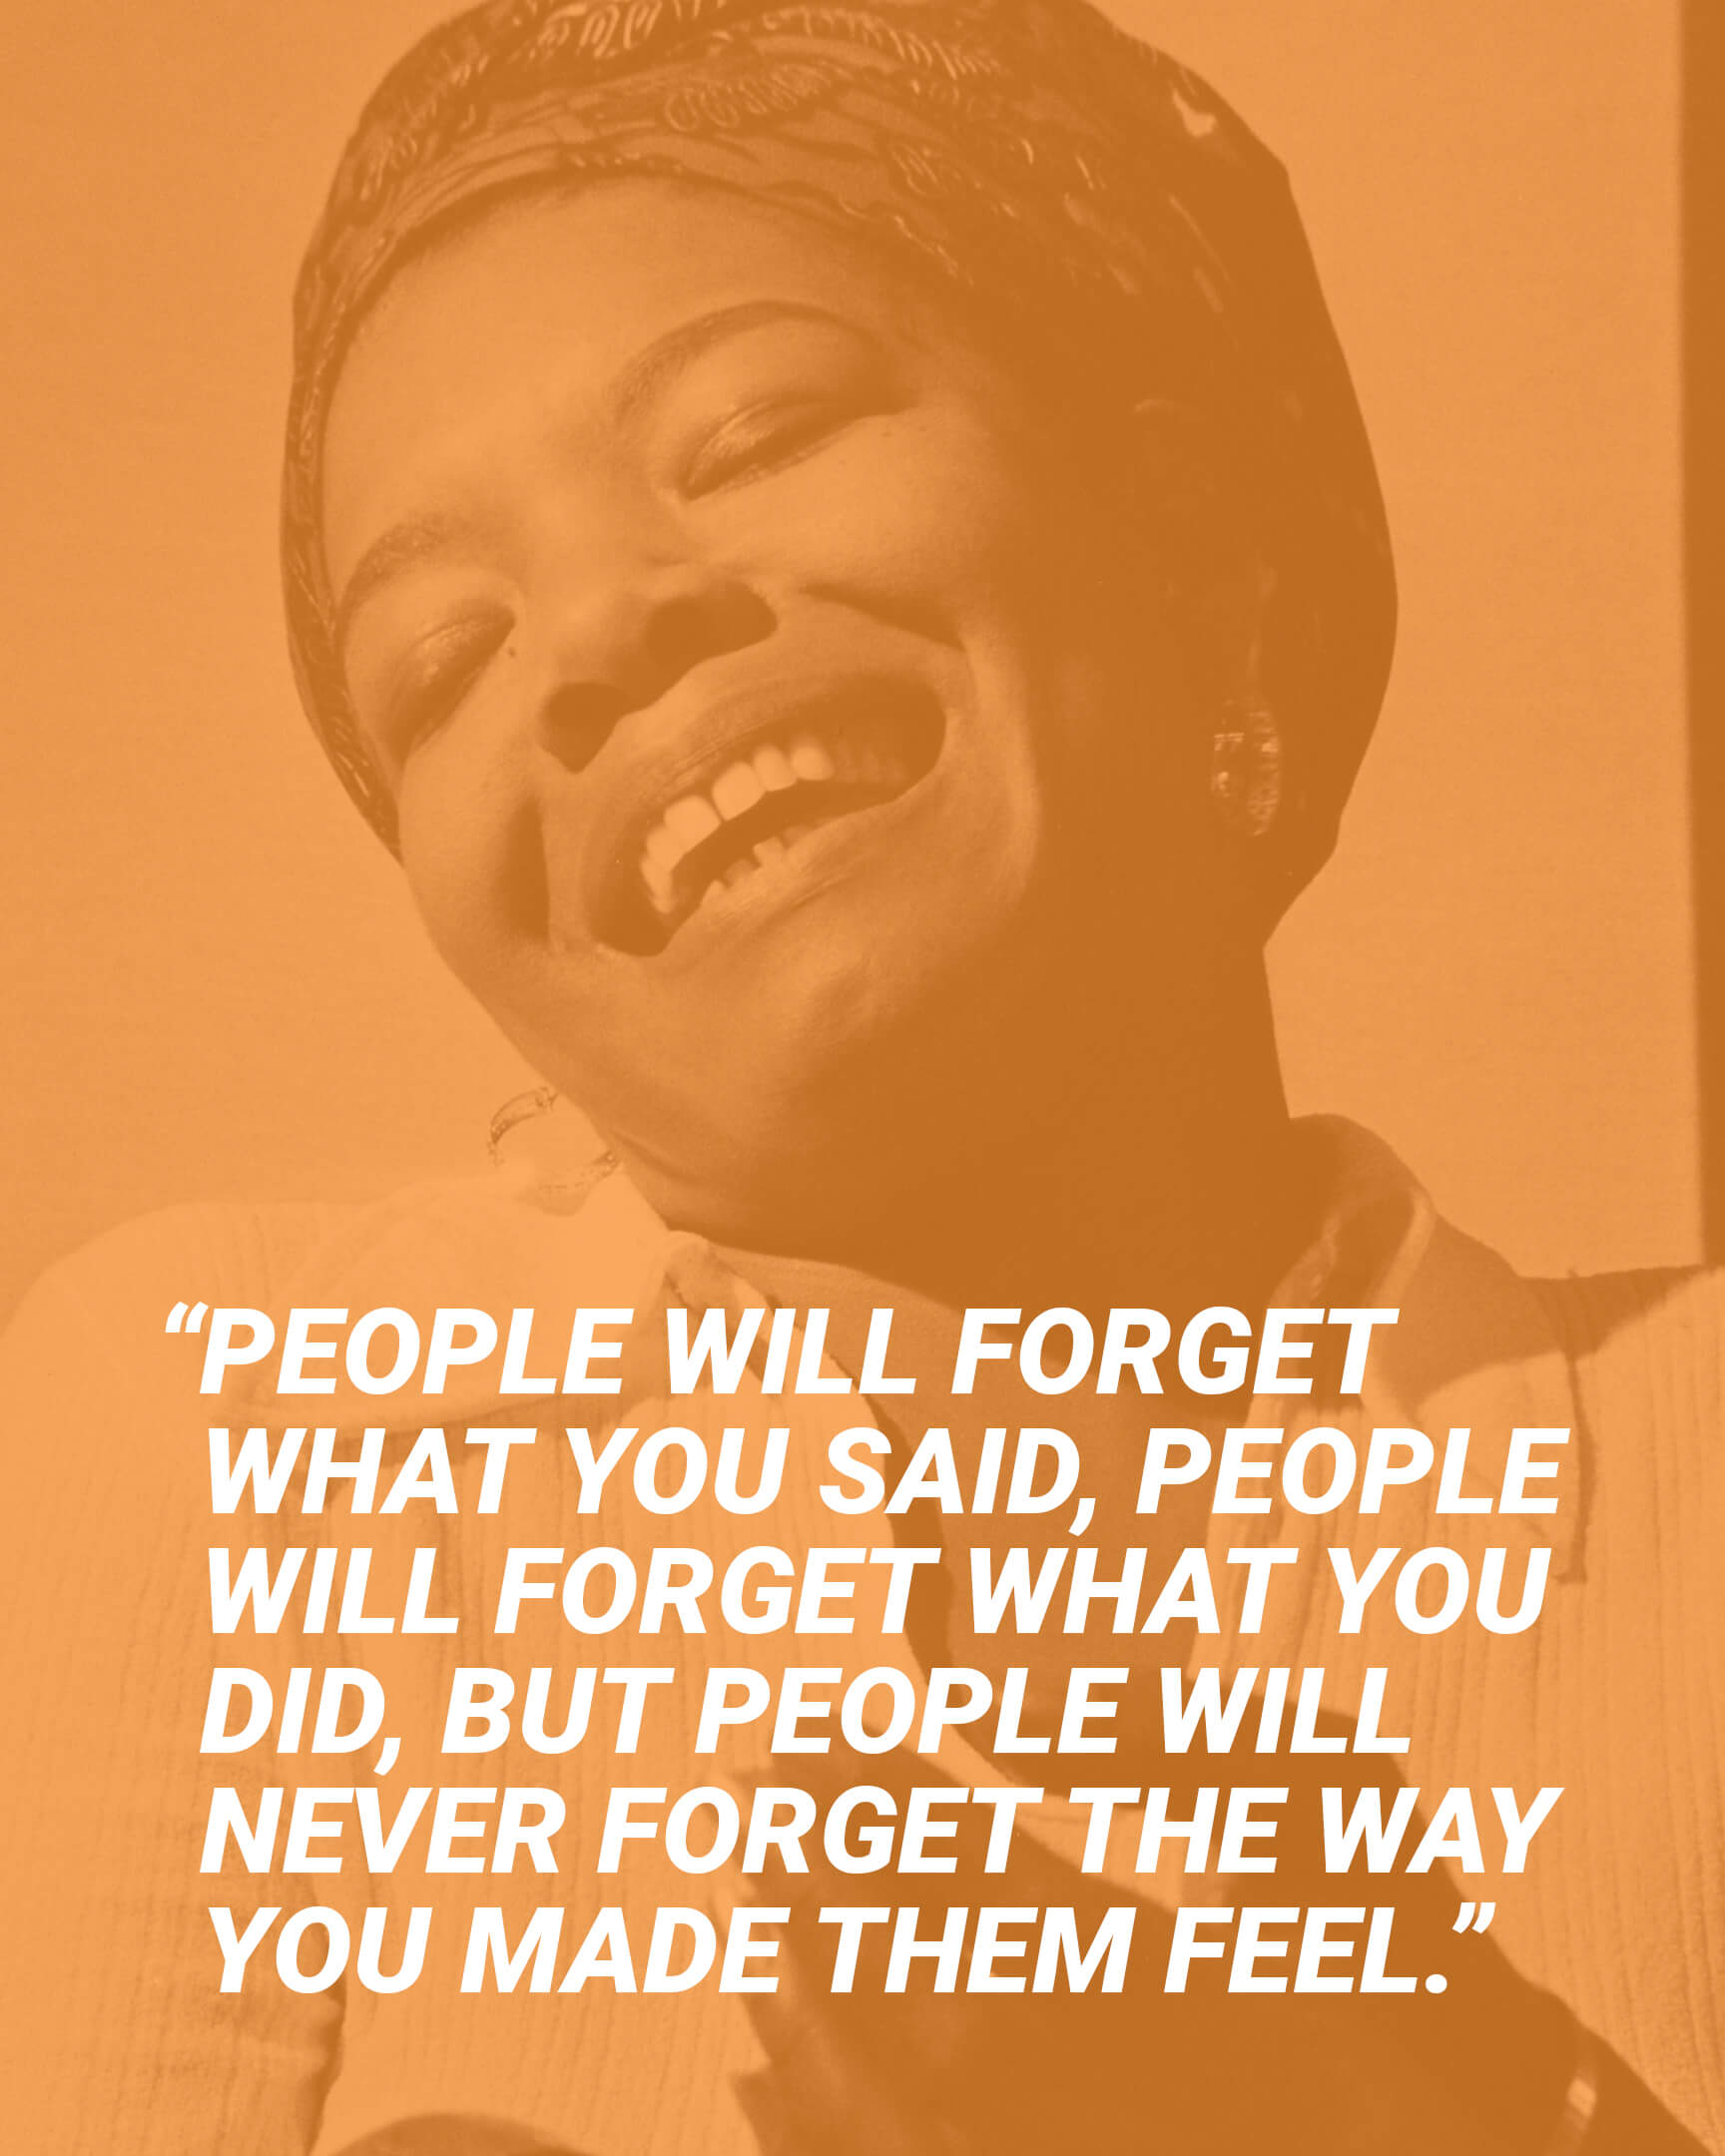 “People will forget what you said, people will forget what you did, but people will never forget the way you made them feel.” - Maya Angelou